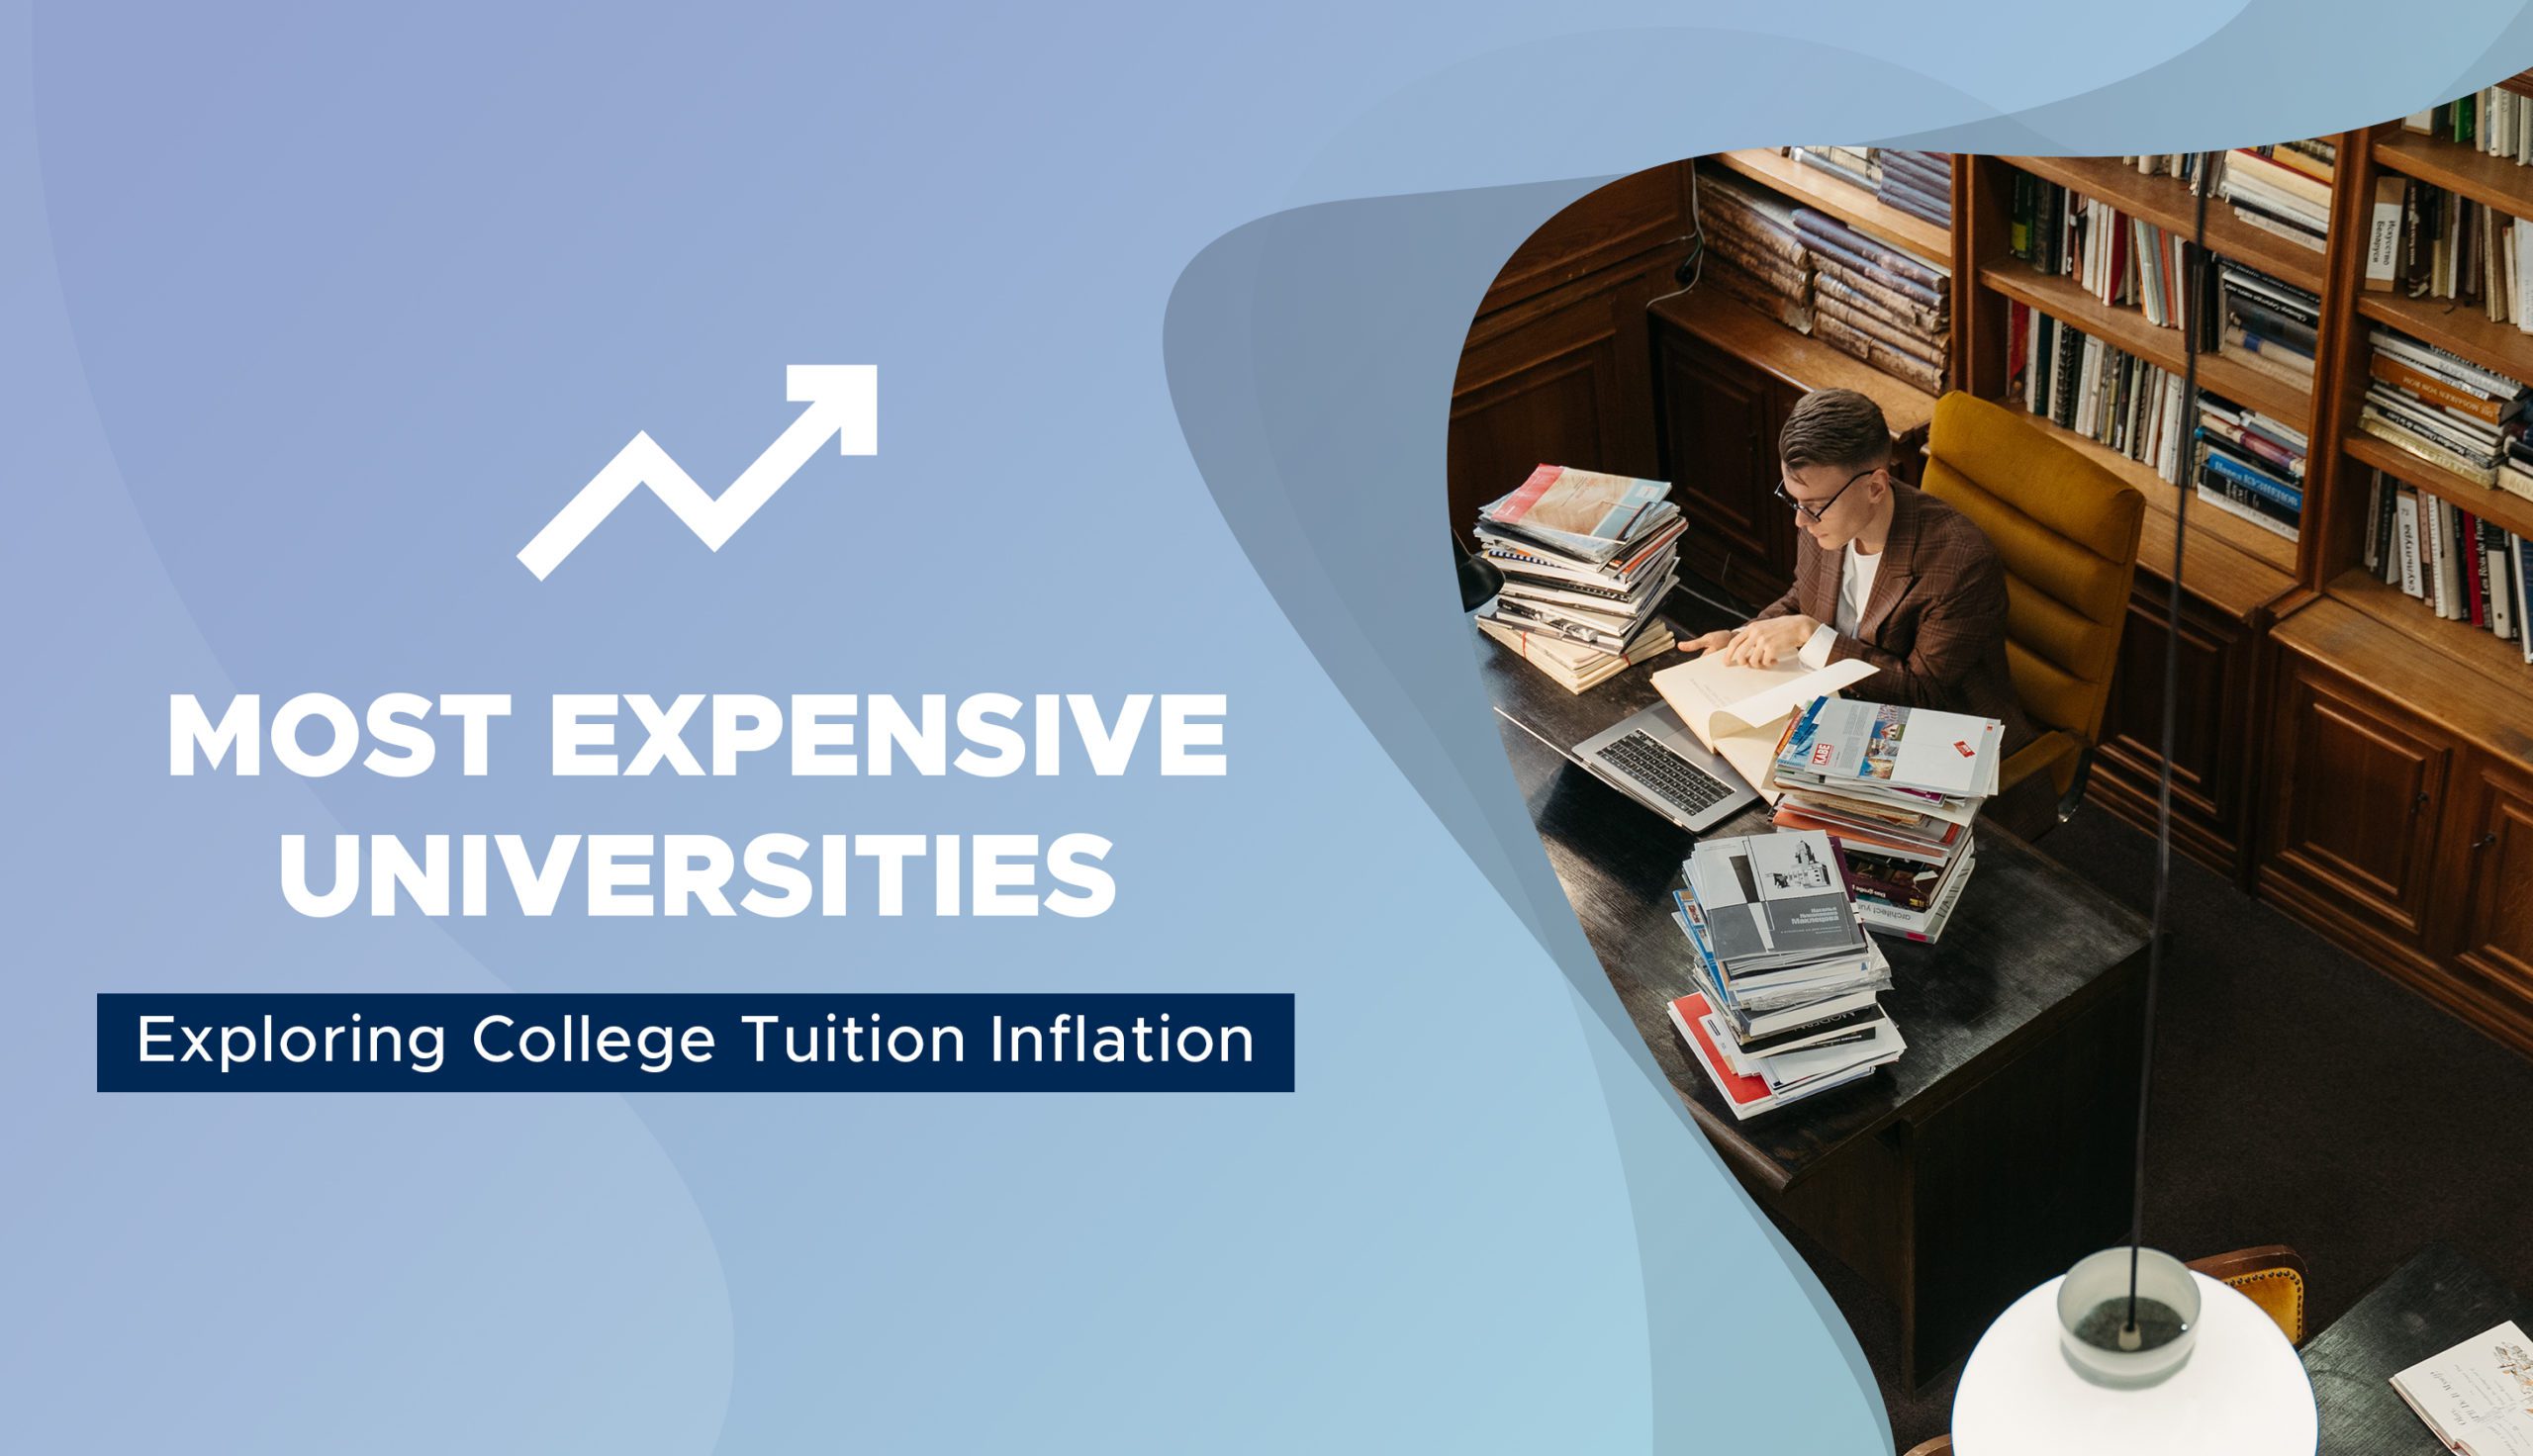 Most Expensive Universities & College Tuition Inflation Best Guide